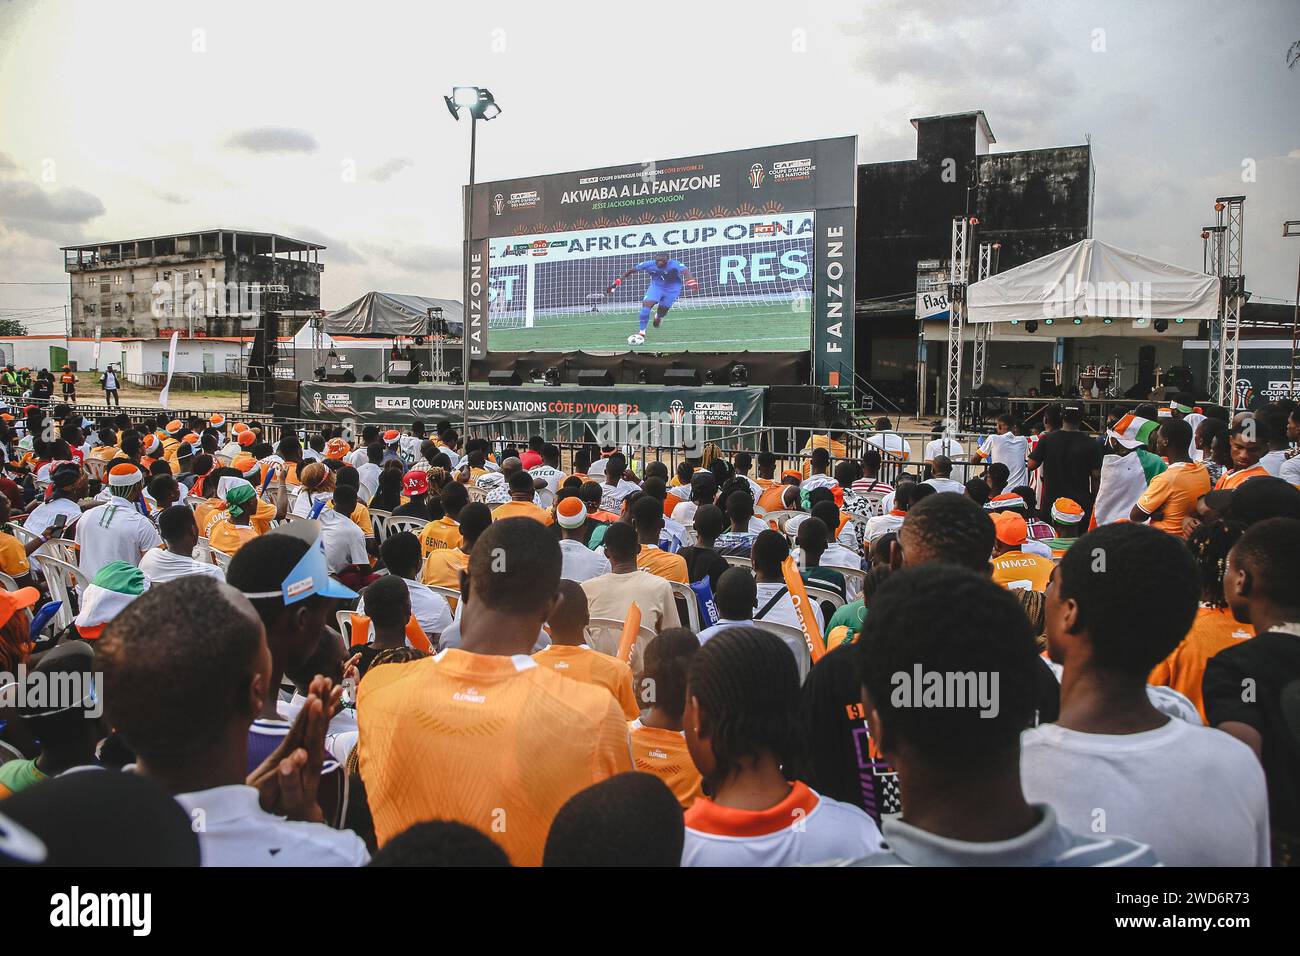 Abidjan, Cote d'Ivoire. 18th Jan, 2024. Fans watch the Africa Cup of Nations (AFCON) football match between Cote d'Ivoire and Nigeria on screen in Abidjan, Cote d'Ivoire, on Jan. 18, 2024. Credit: Yvan Sonh/Xinhua/Alamy Live News Stock Photo